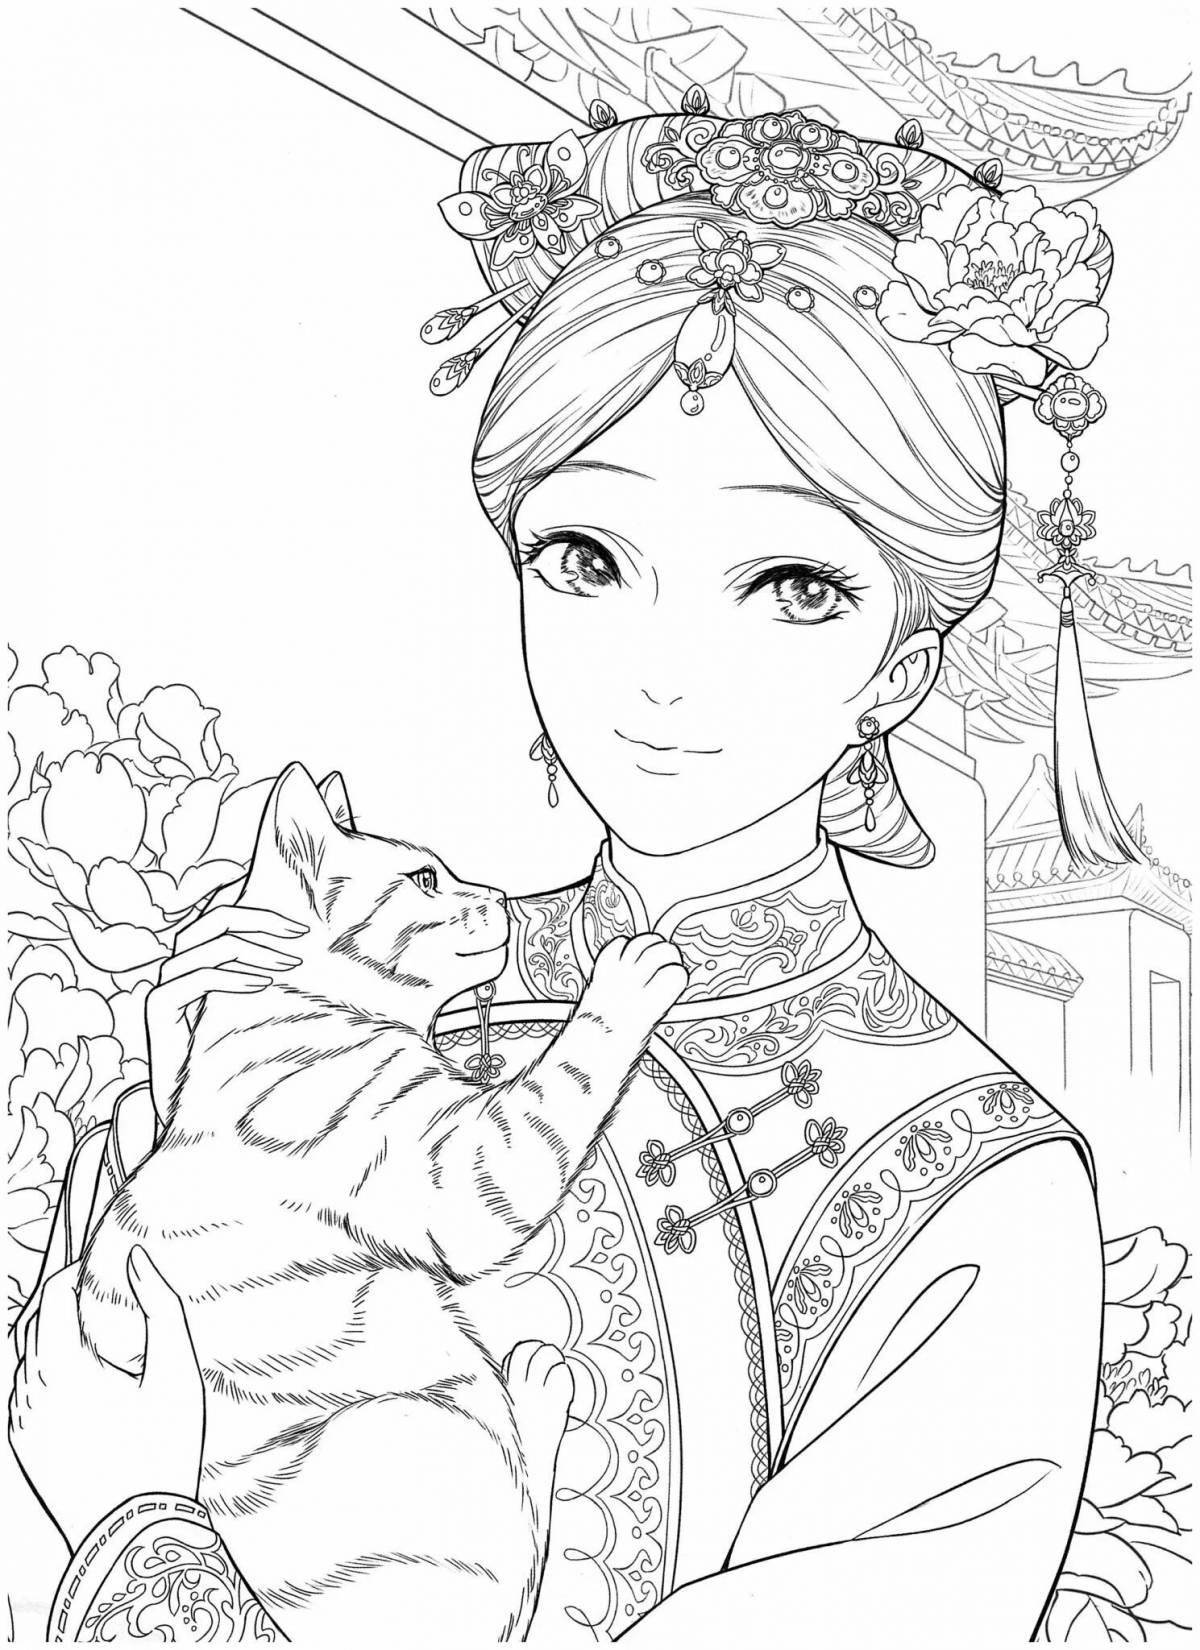 Tempting Chinese coloring book